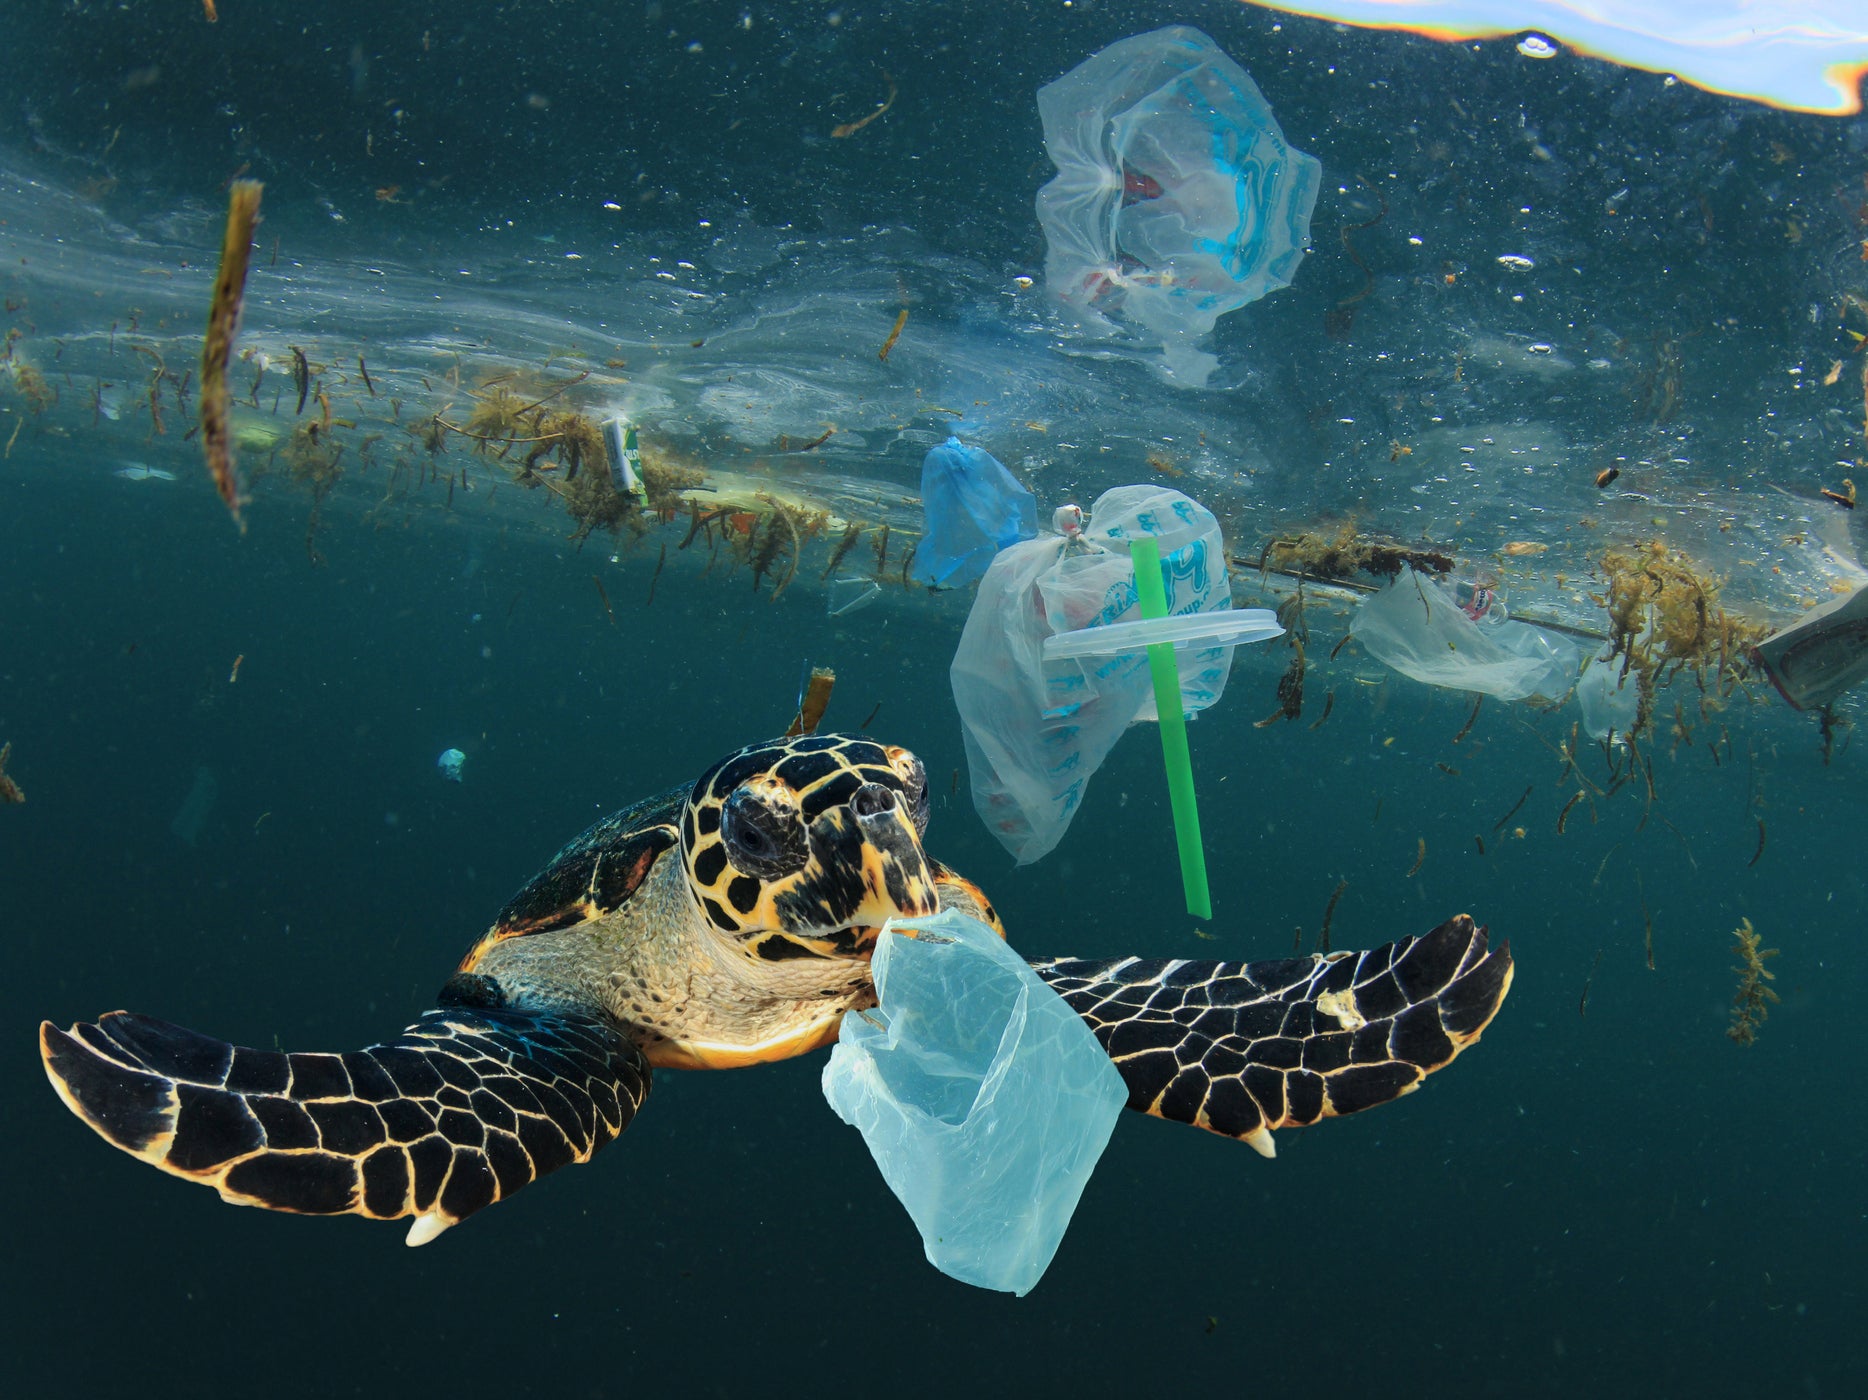 Animals such as turtles will eat plastic waste, mistaking it for food